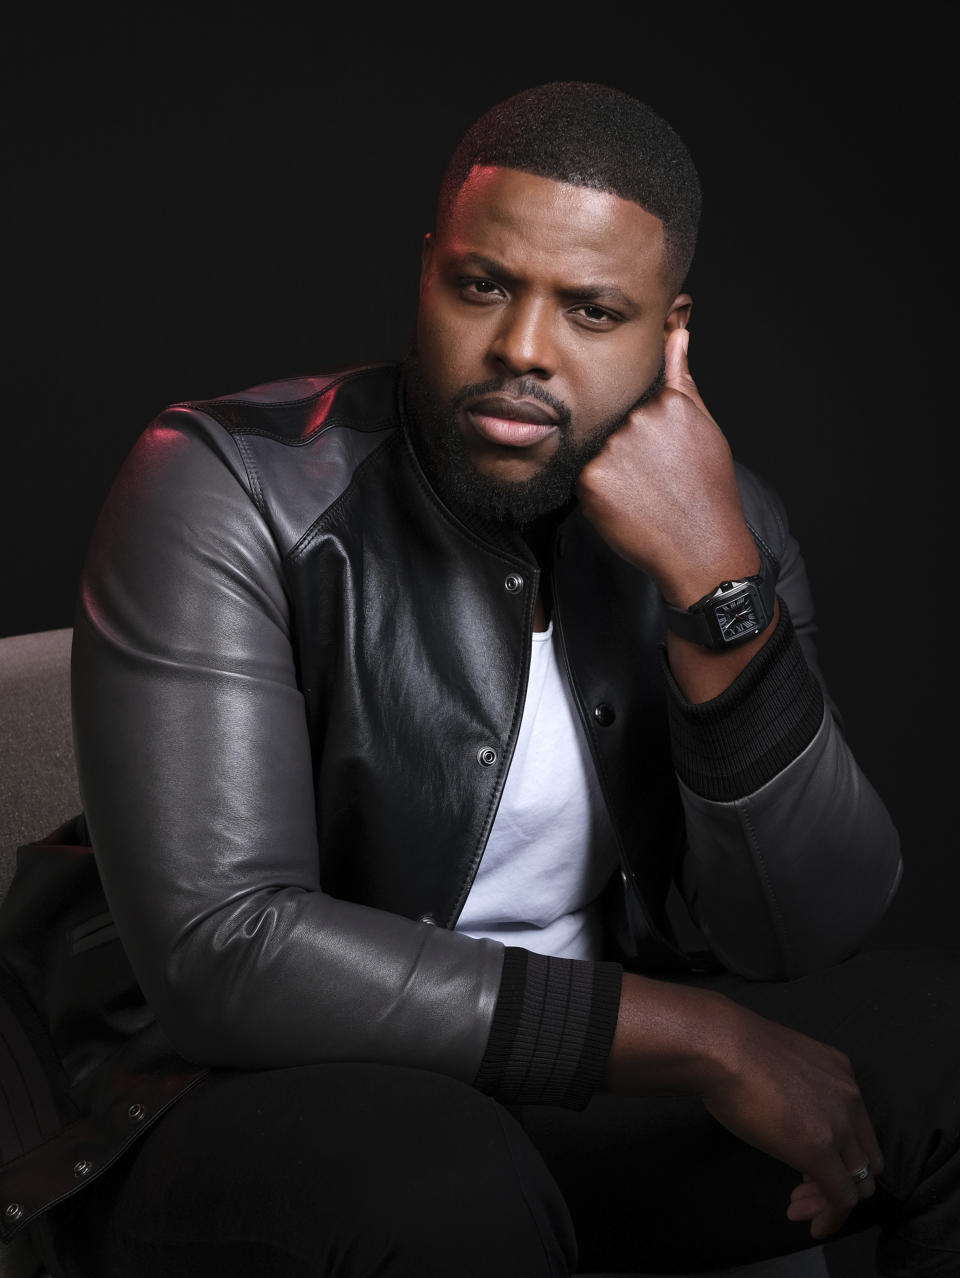 This March 12, 2019 photo shows Winston Duke, a cast member in the film "Us," posing at the The London West Hollywood in West Hollywood, Calif. (Photo by Chris Pizzello/Invision/AP)